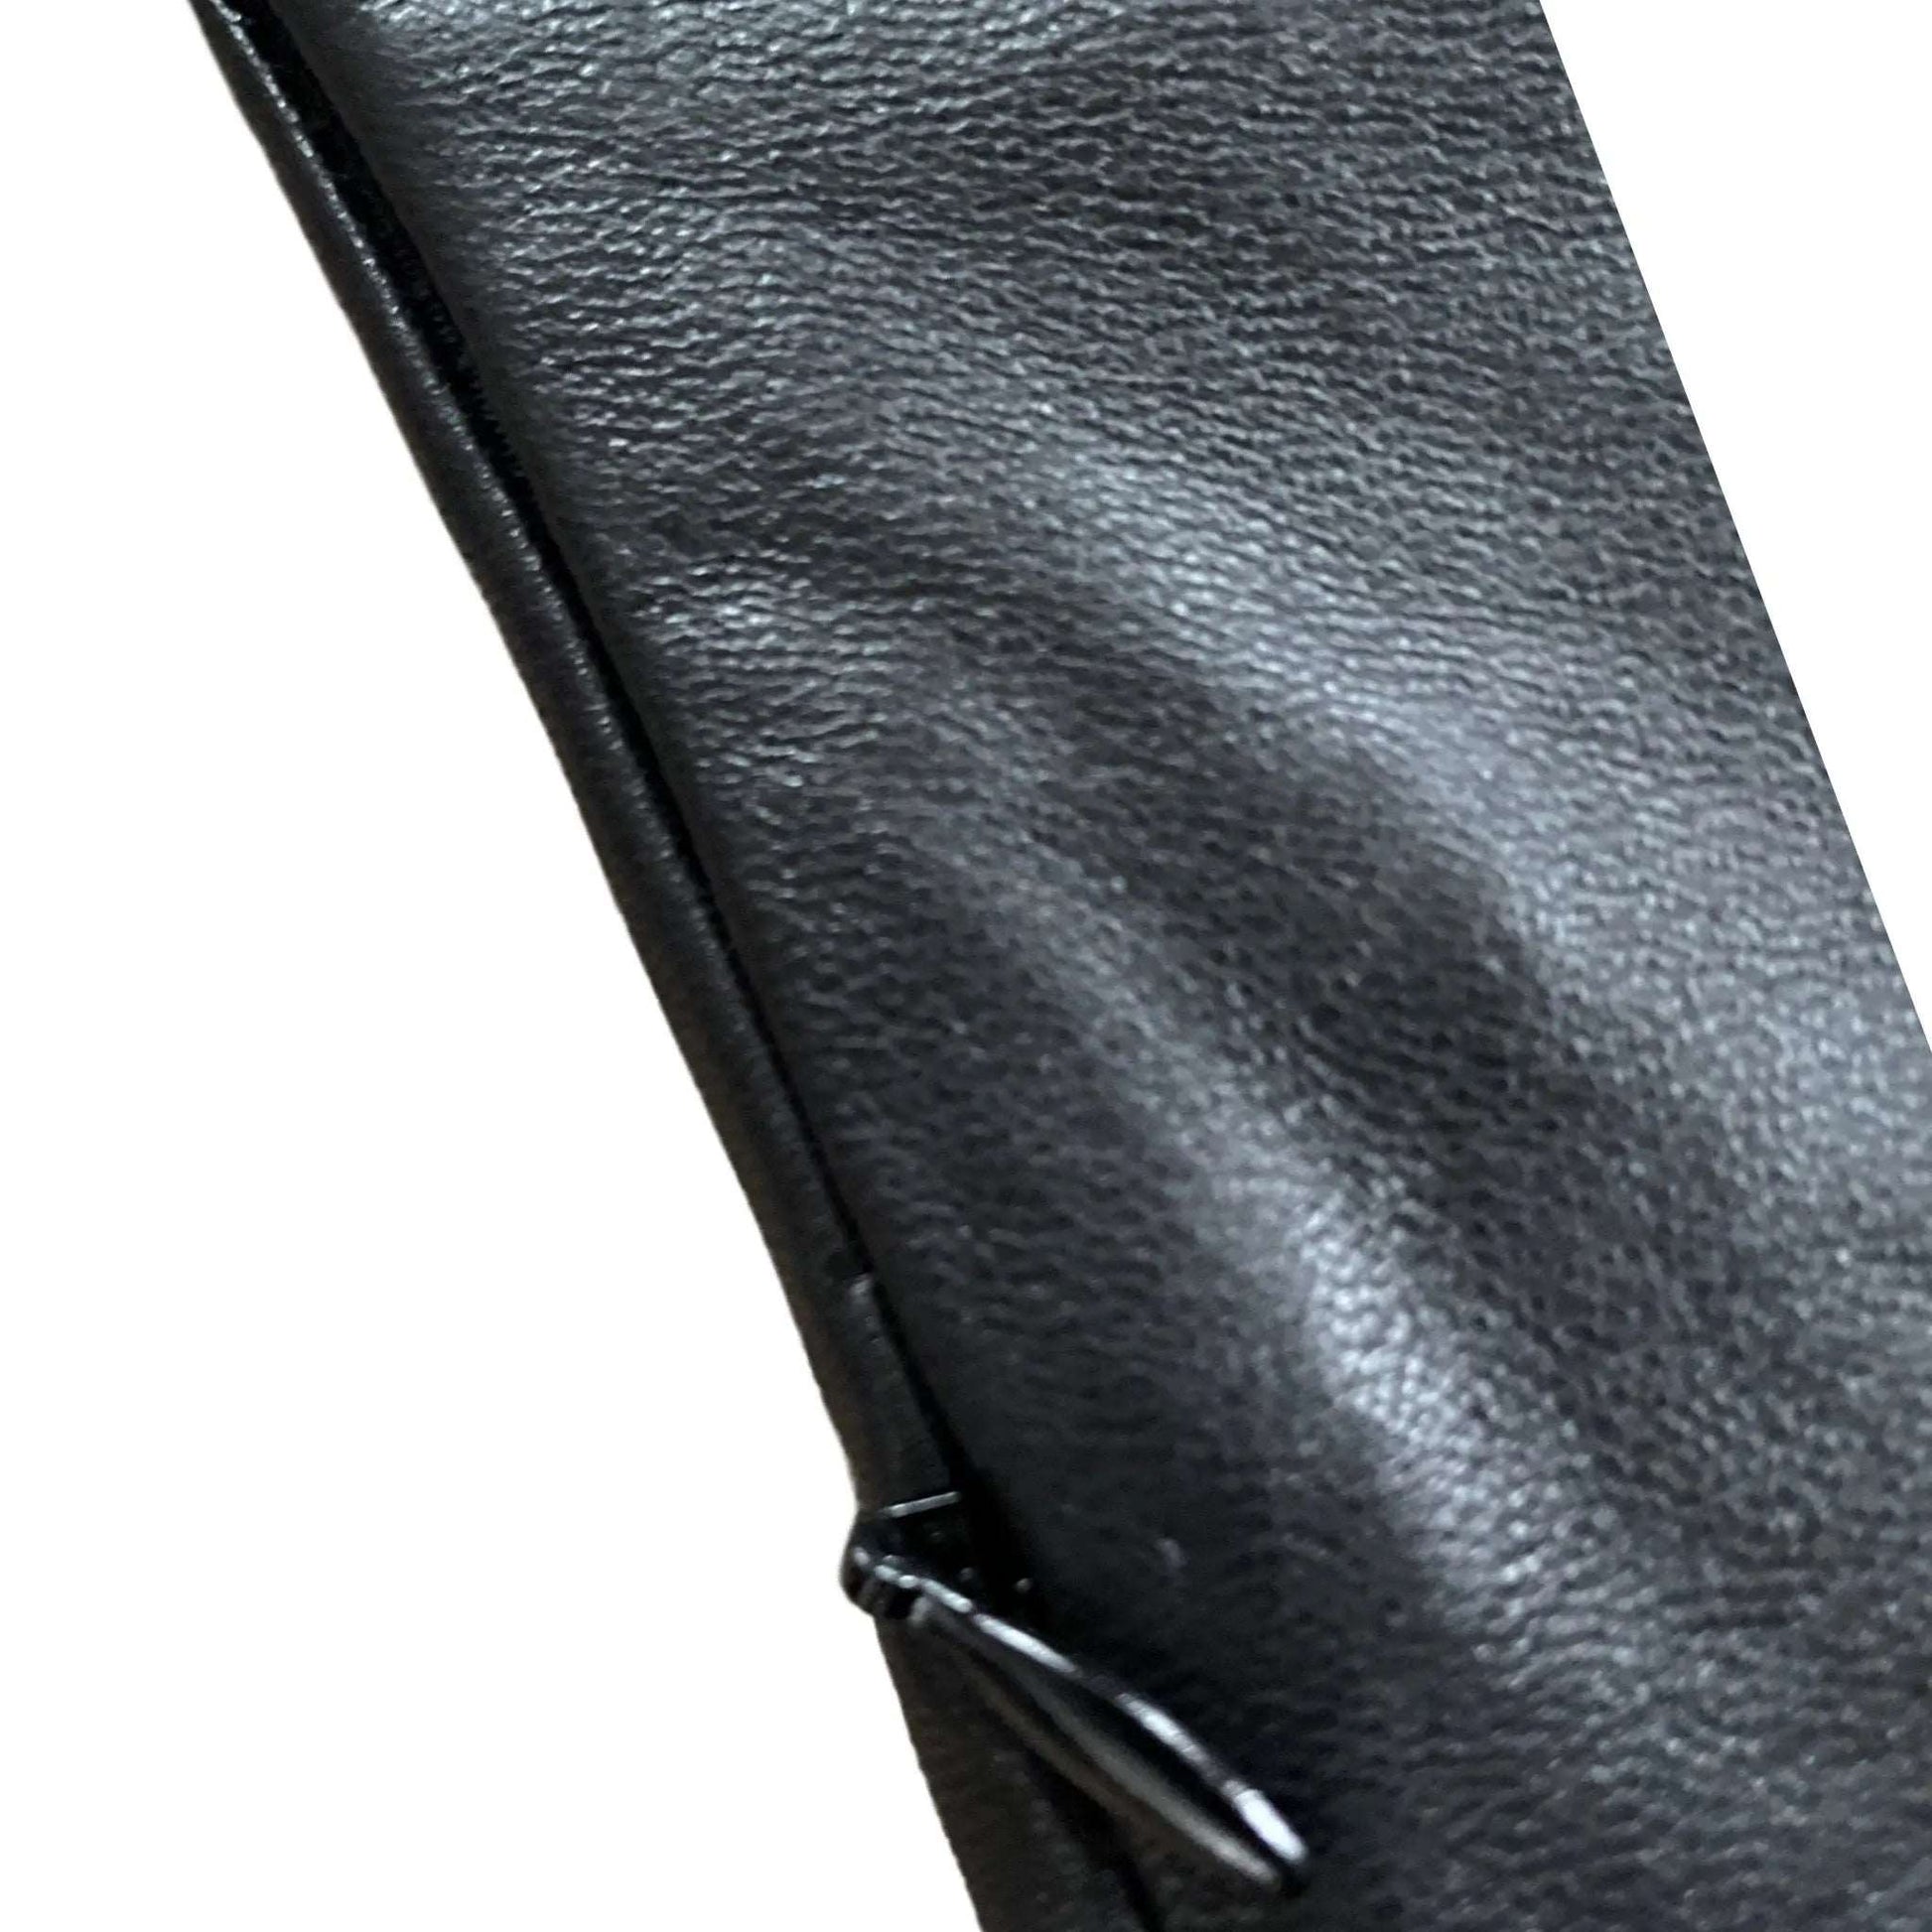 Long leather gloves Handmade Accessories